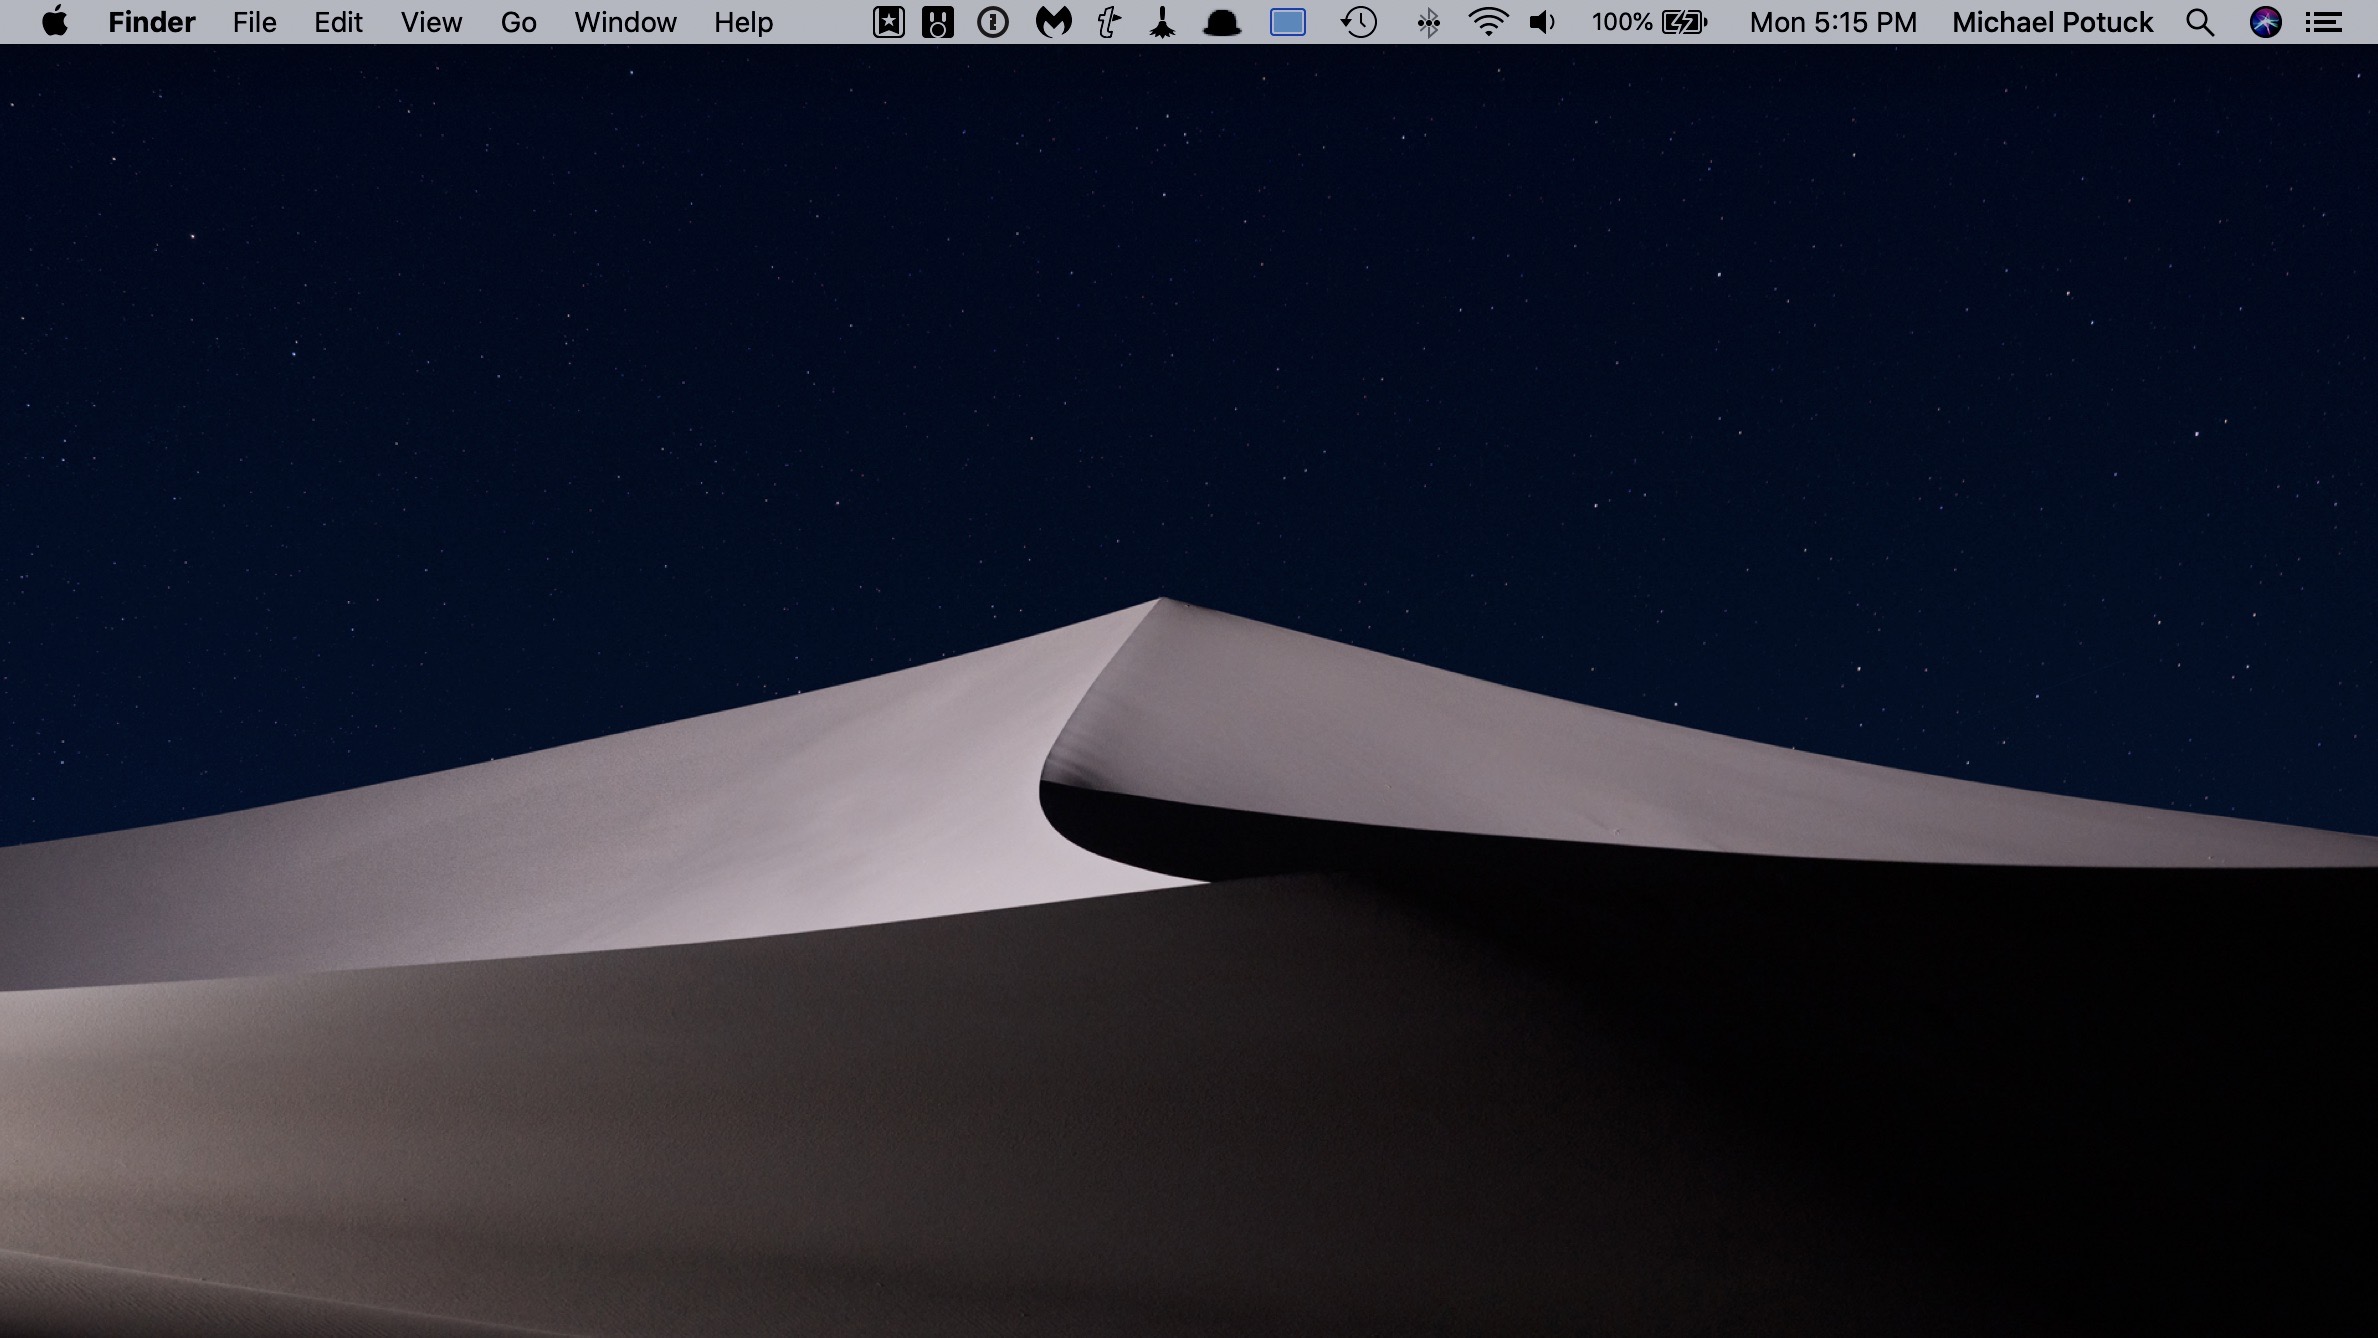 mac change background image for other screen